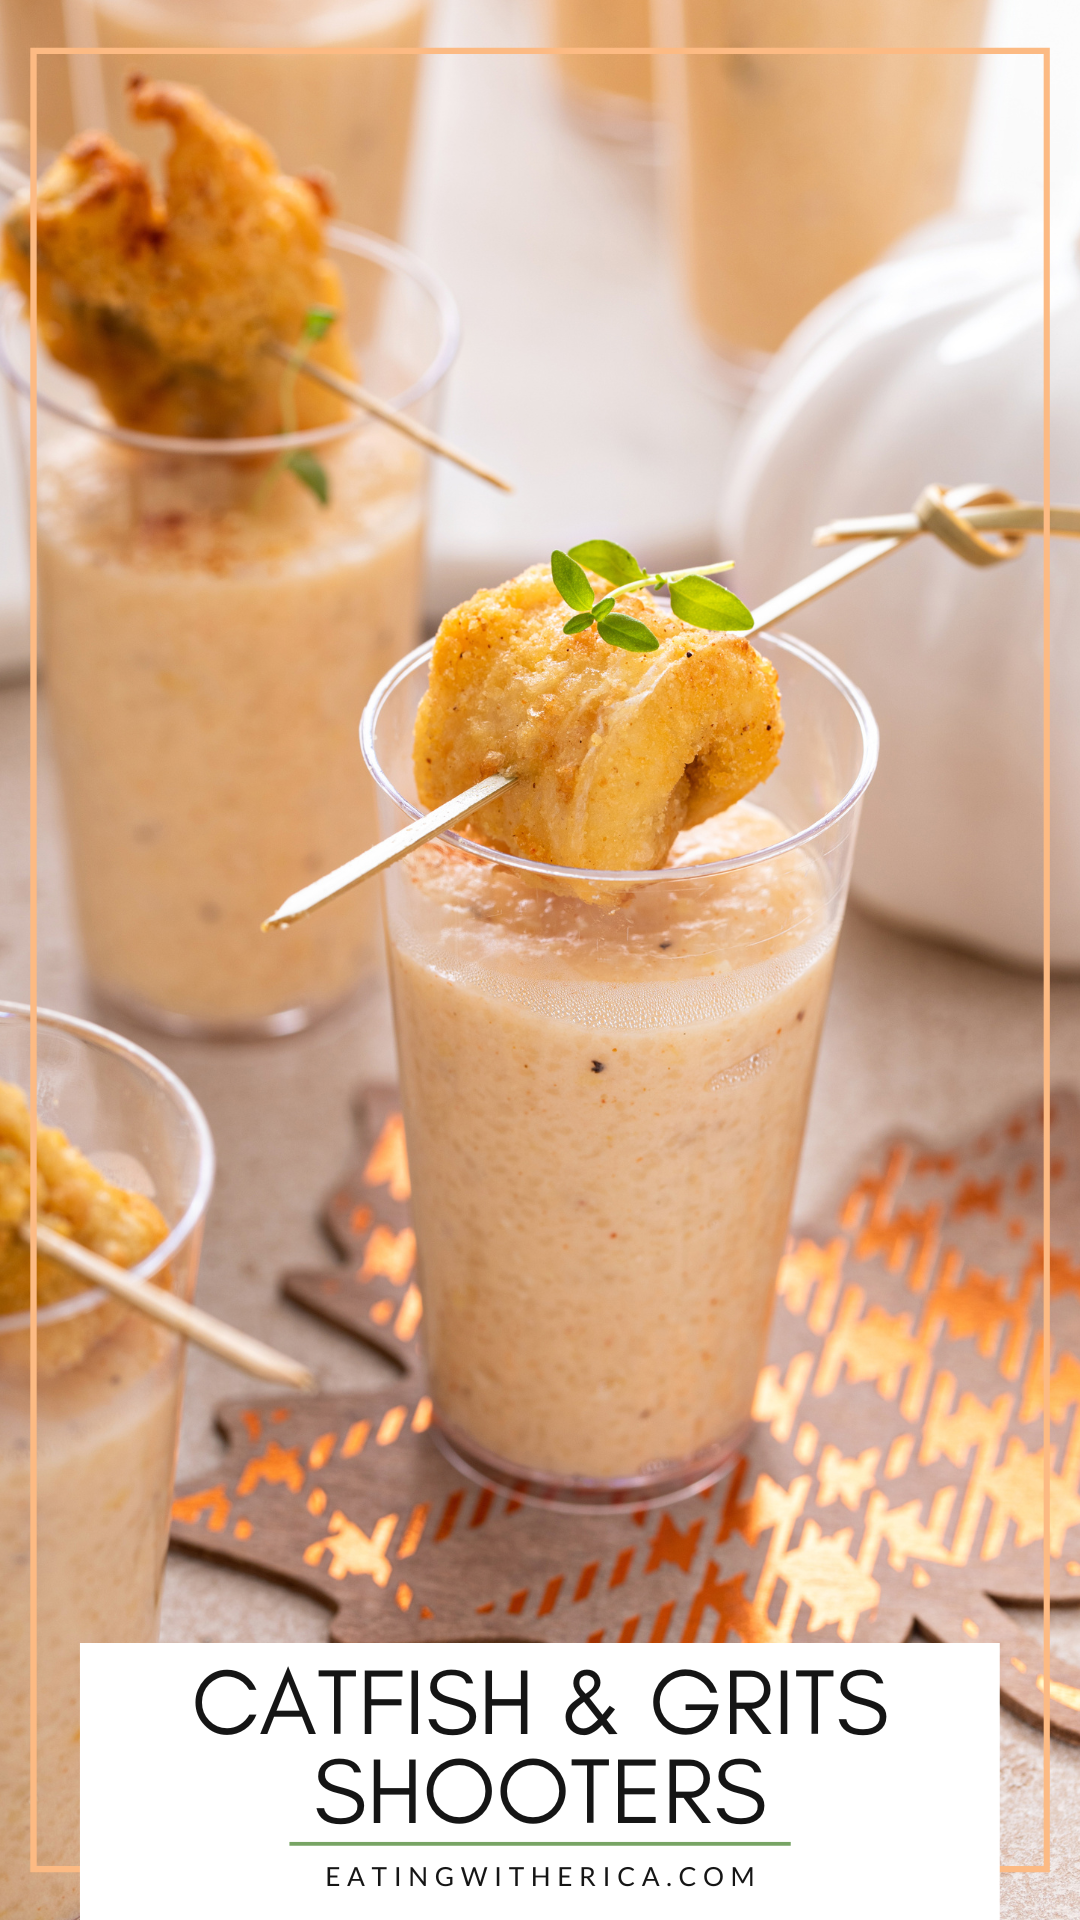 Hands down the perfect appetizer for any holiday party this year! Click here to try a Catfish and Grits Shooter!